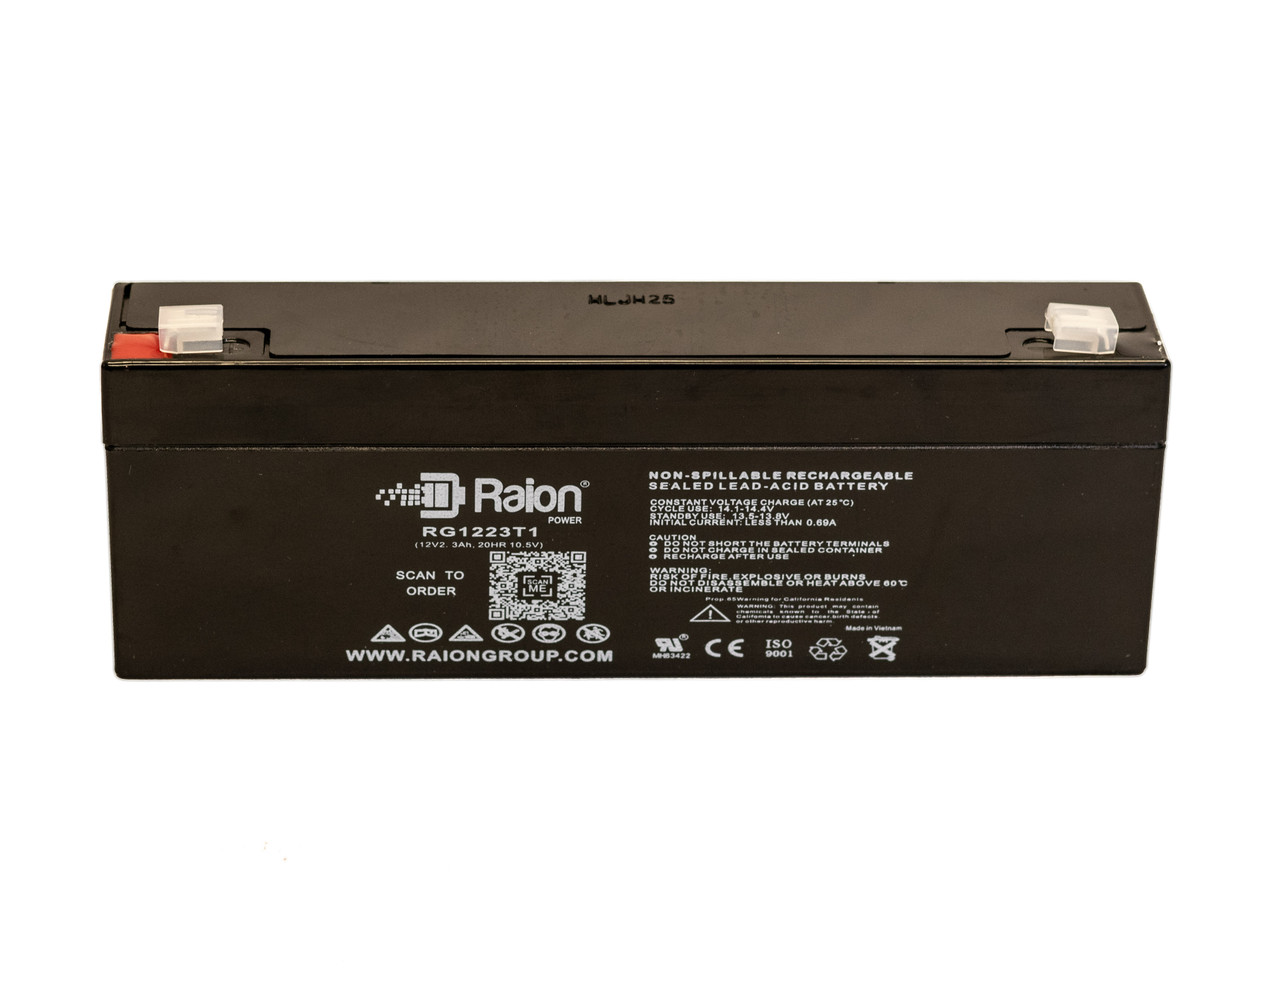 Raion Power 12V 2.3Ah SLA Battery With T1 Terminals For Esaote Biomedical ECG P80